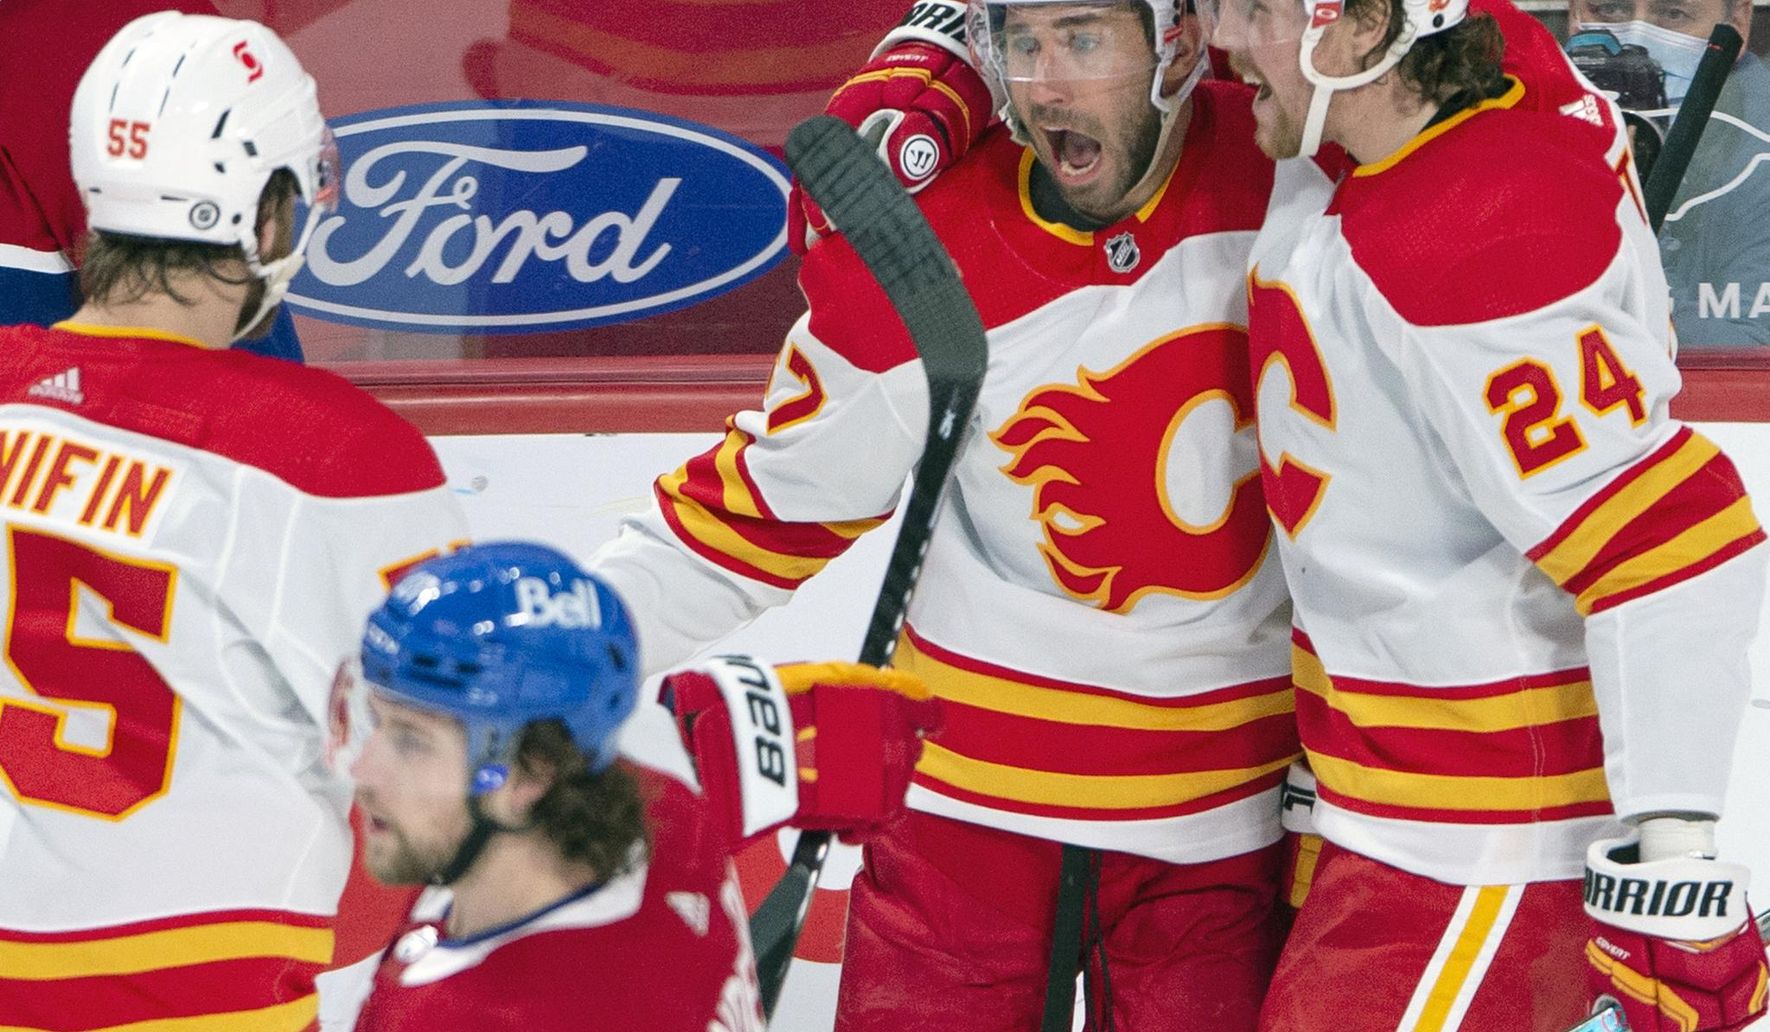 Giordano, Markstrom lead Flames to 4-1 win over Canadiens